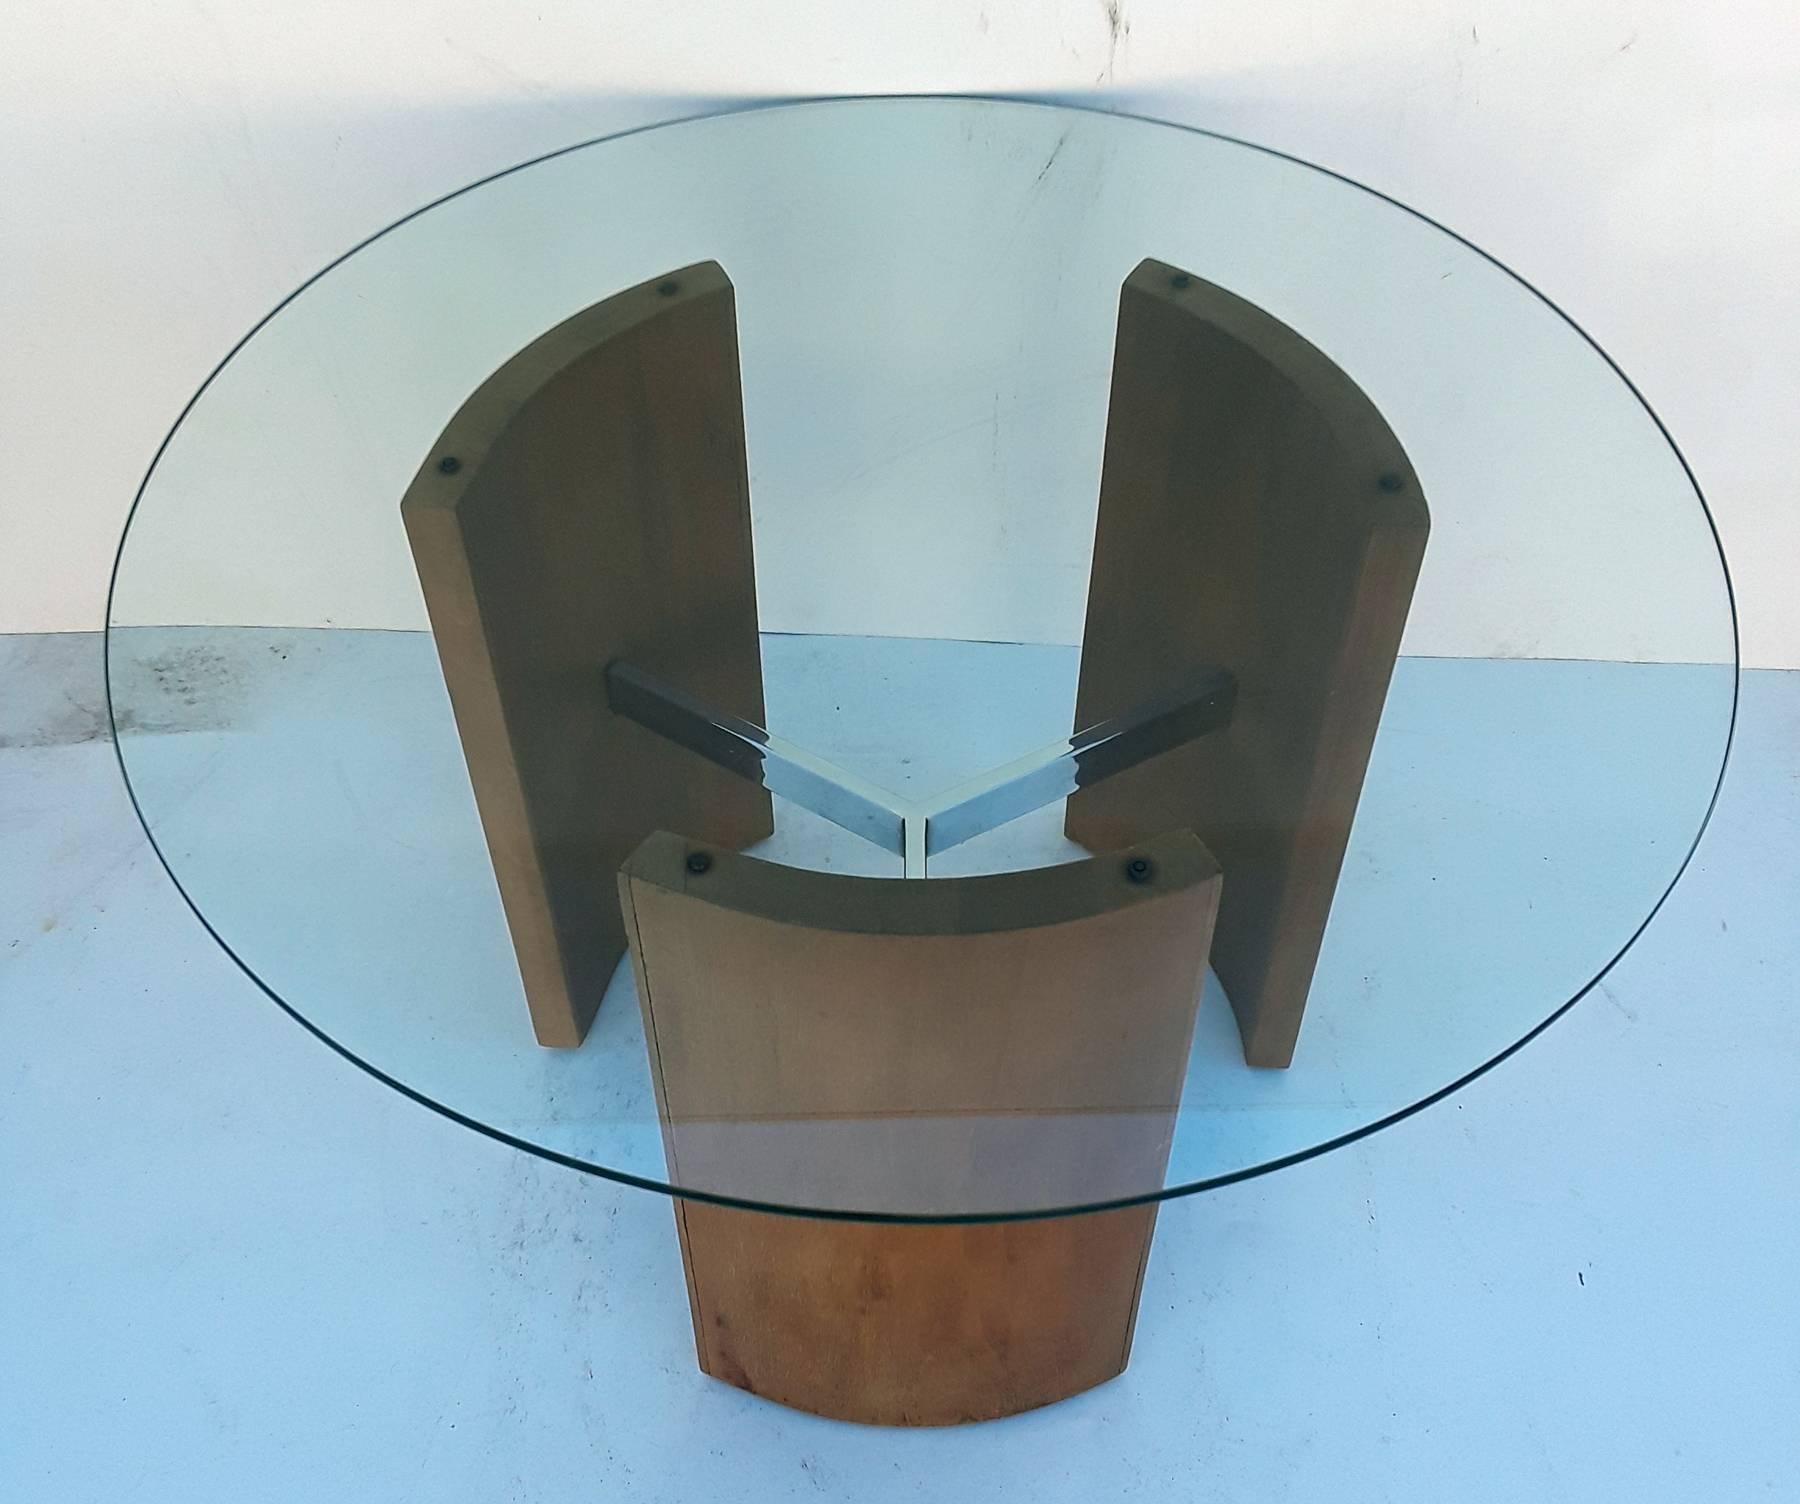 Three curved wood stands connected by chrome stretchers make up this Vladimir Kagan Radius table. Many possible uses from an end table to a plant stand. Glass 30 inch diameter base without glass about 20 inch diameter.